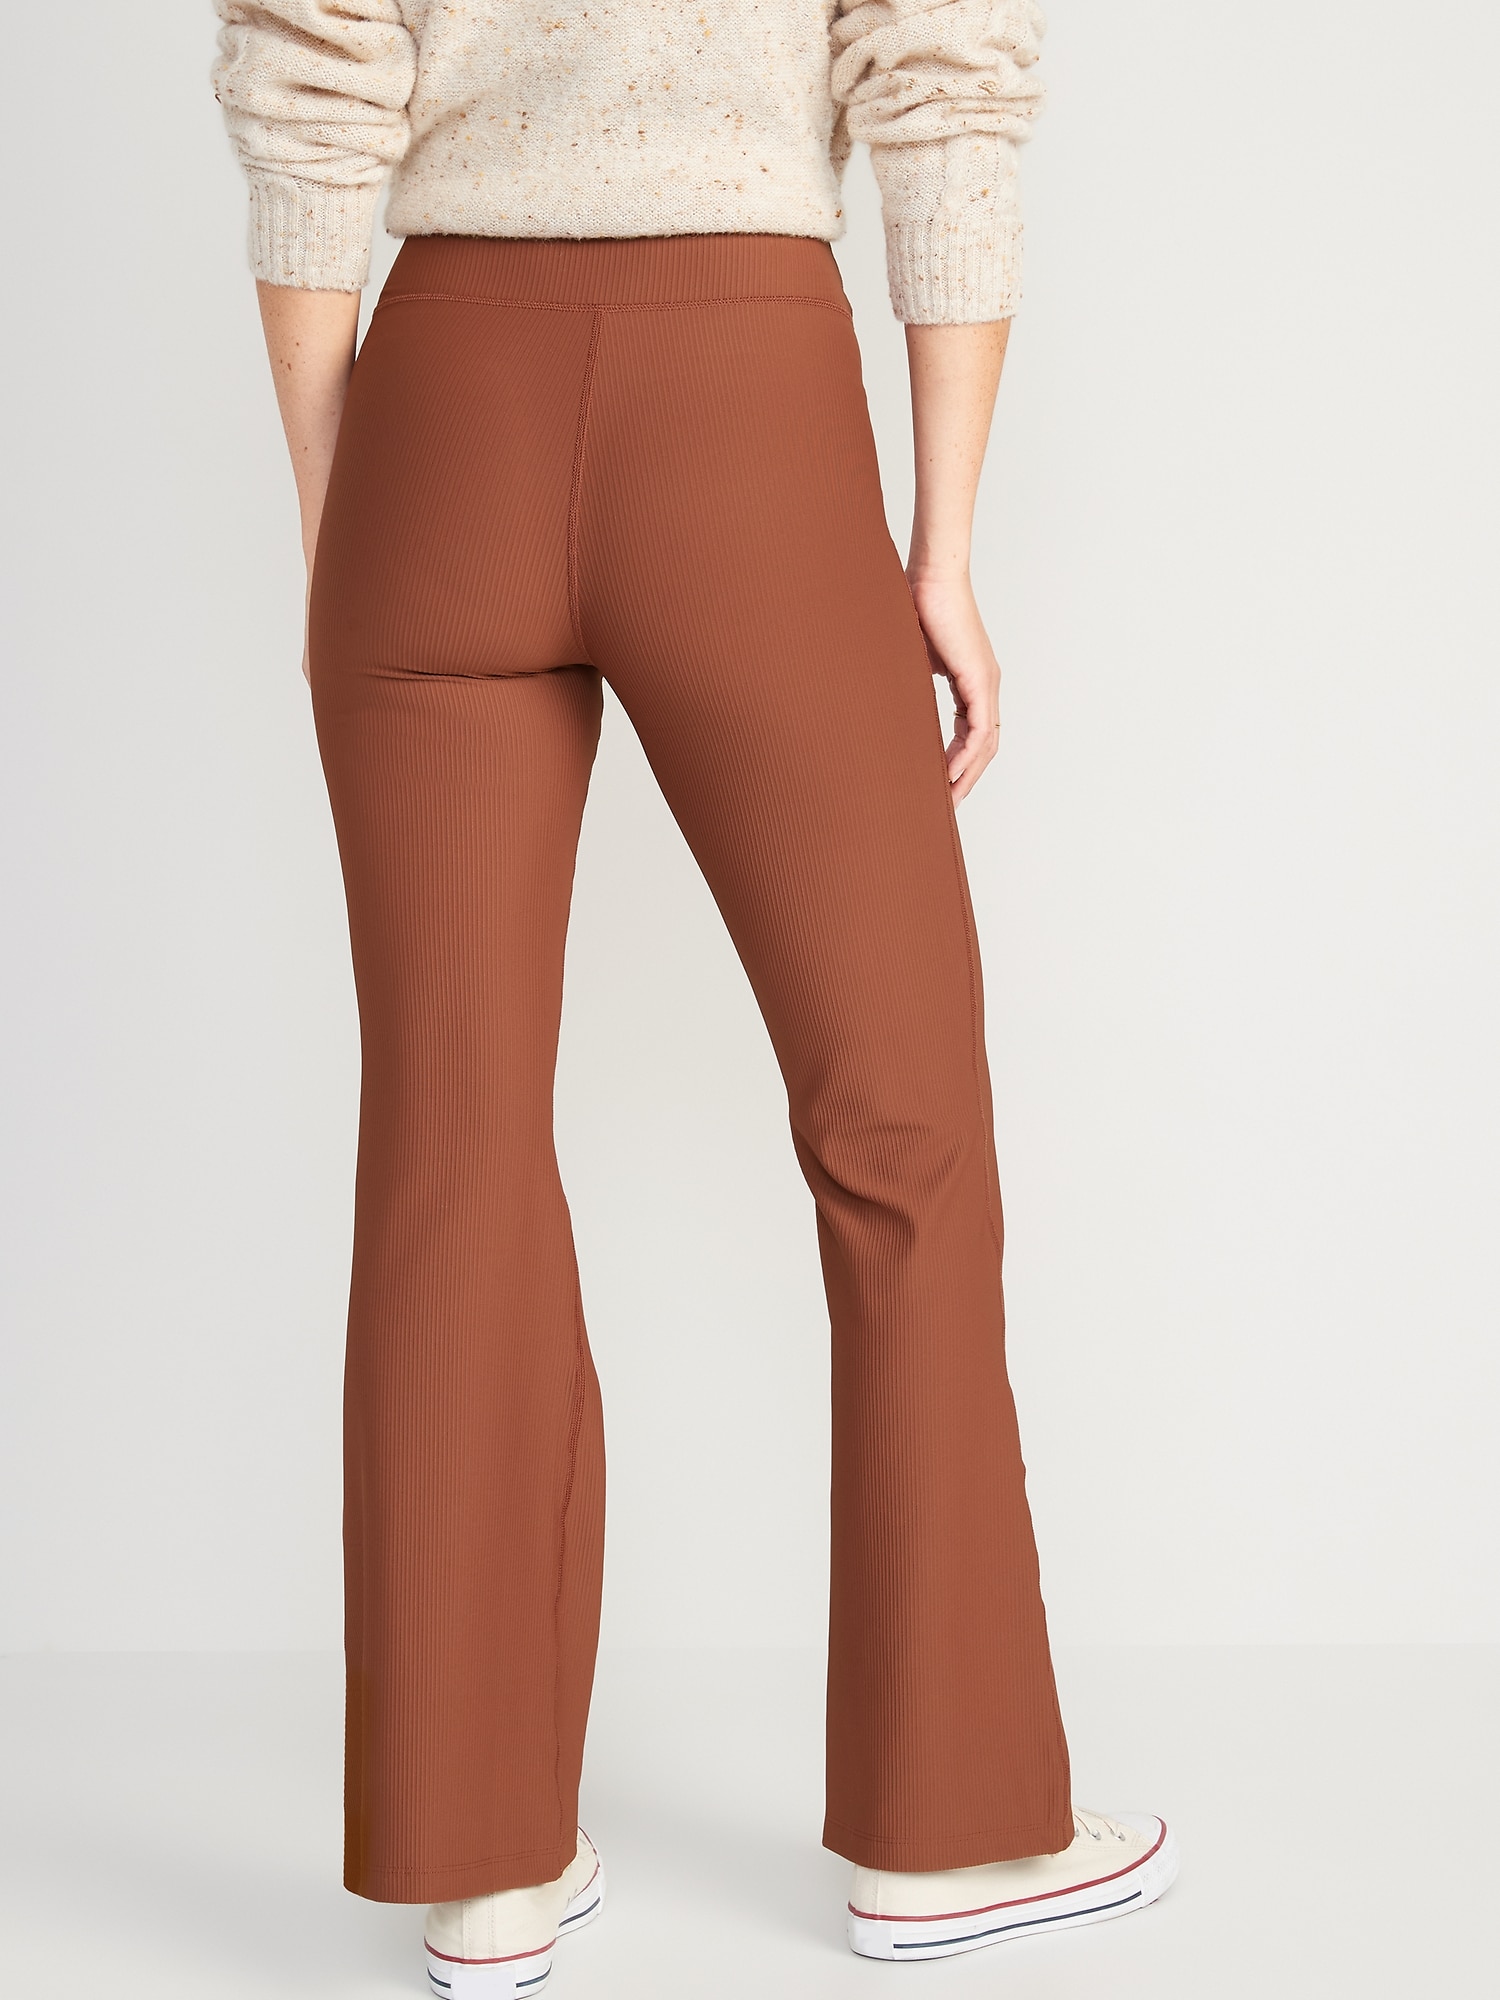 Extra High-Waisted PowerSoft Rib-Knit Flare Pants for Women, Old Navy